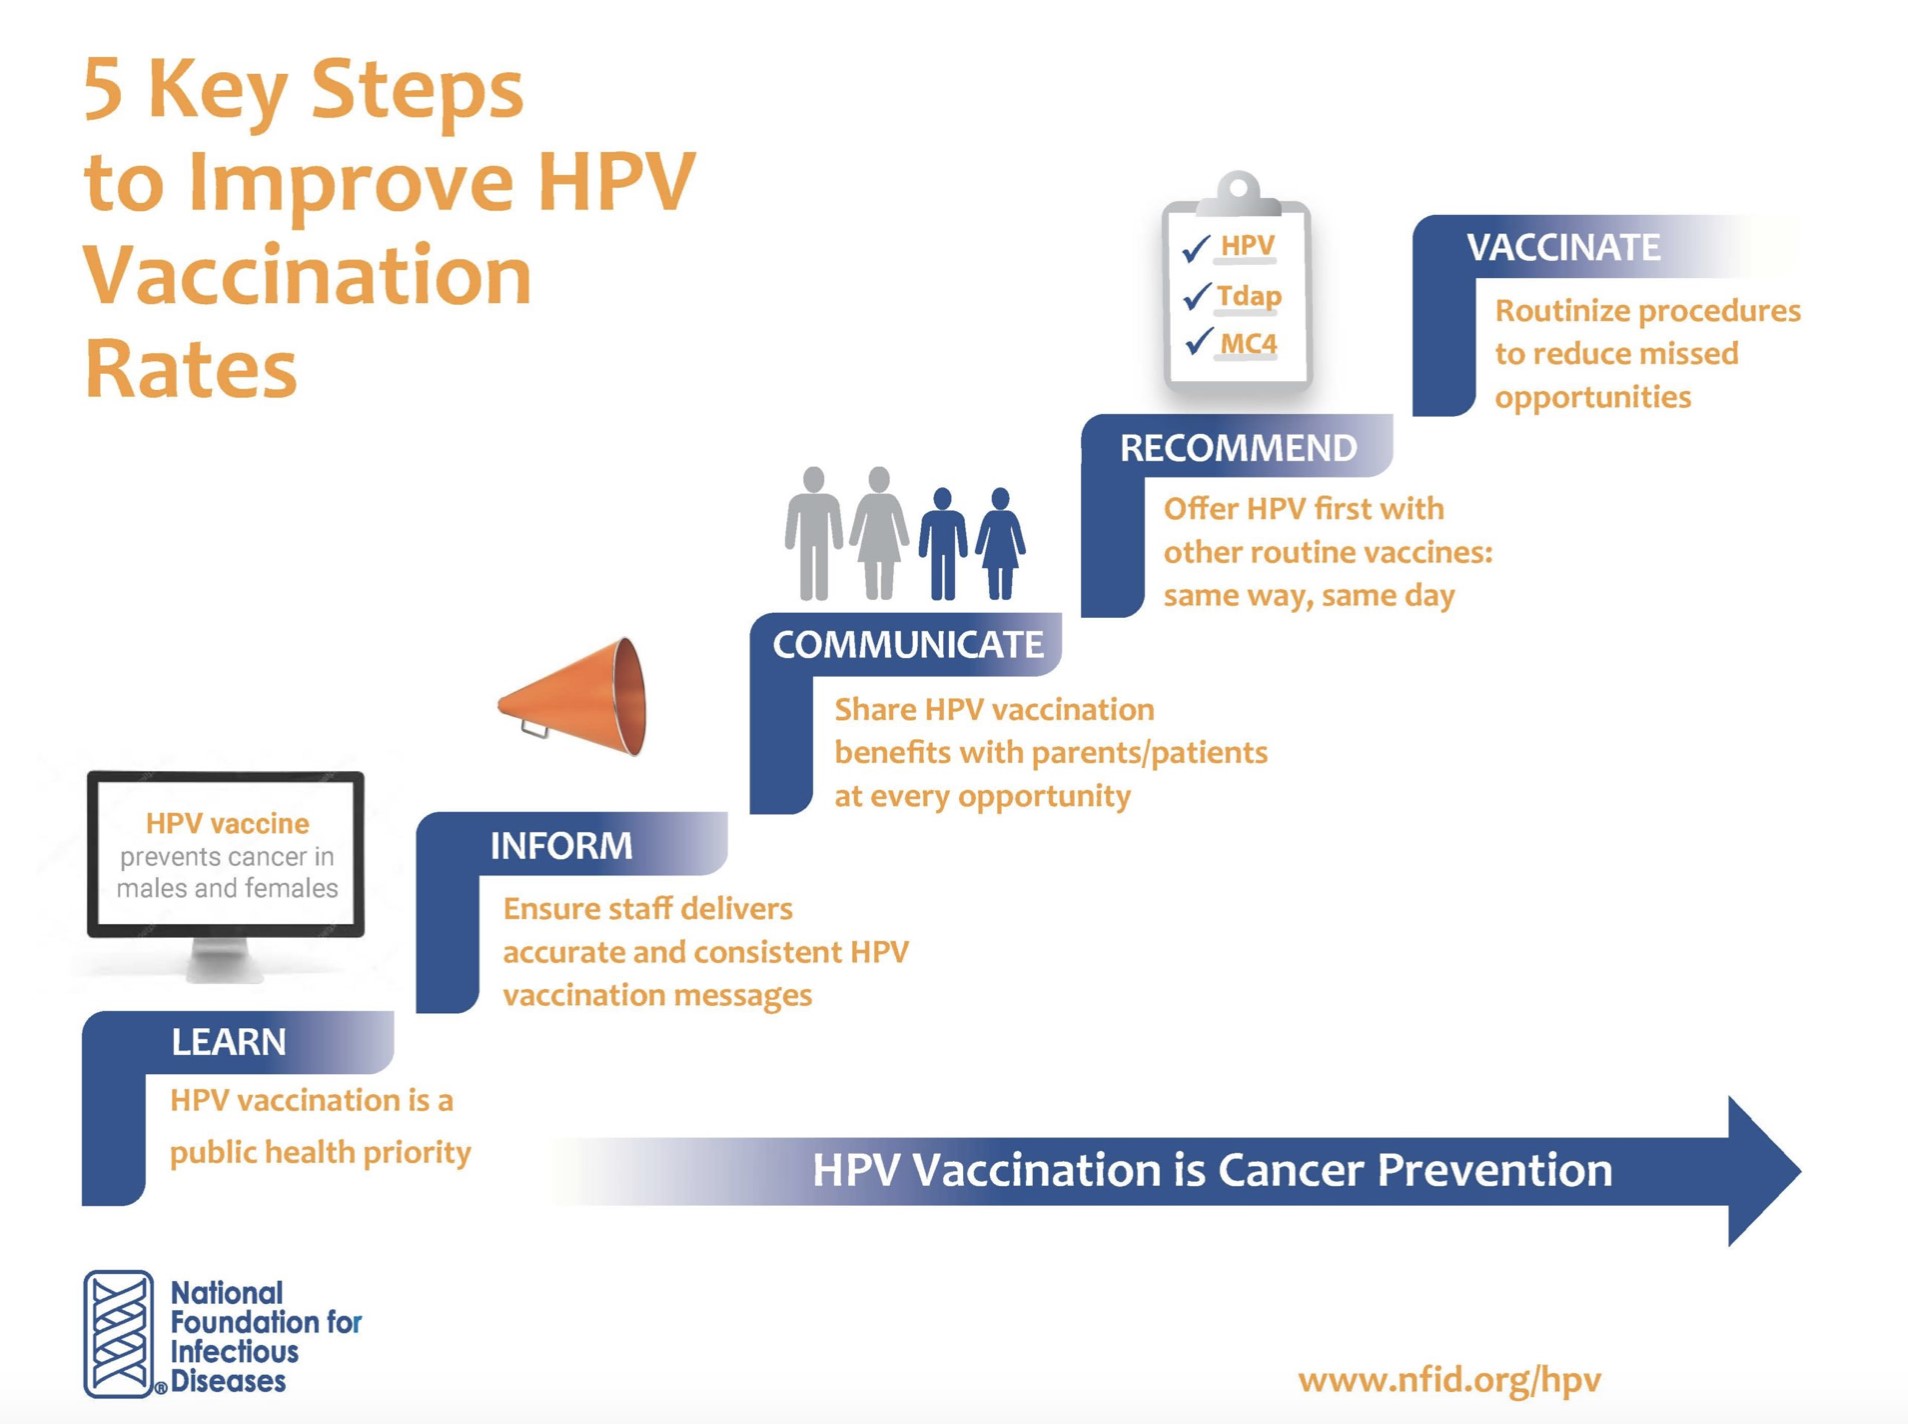 5 key steps to improve HPV vaccination rates